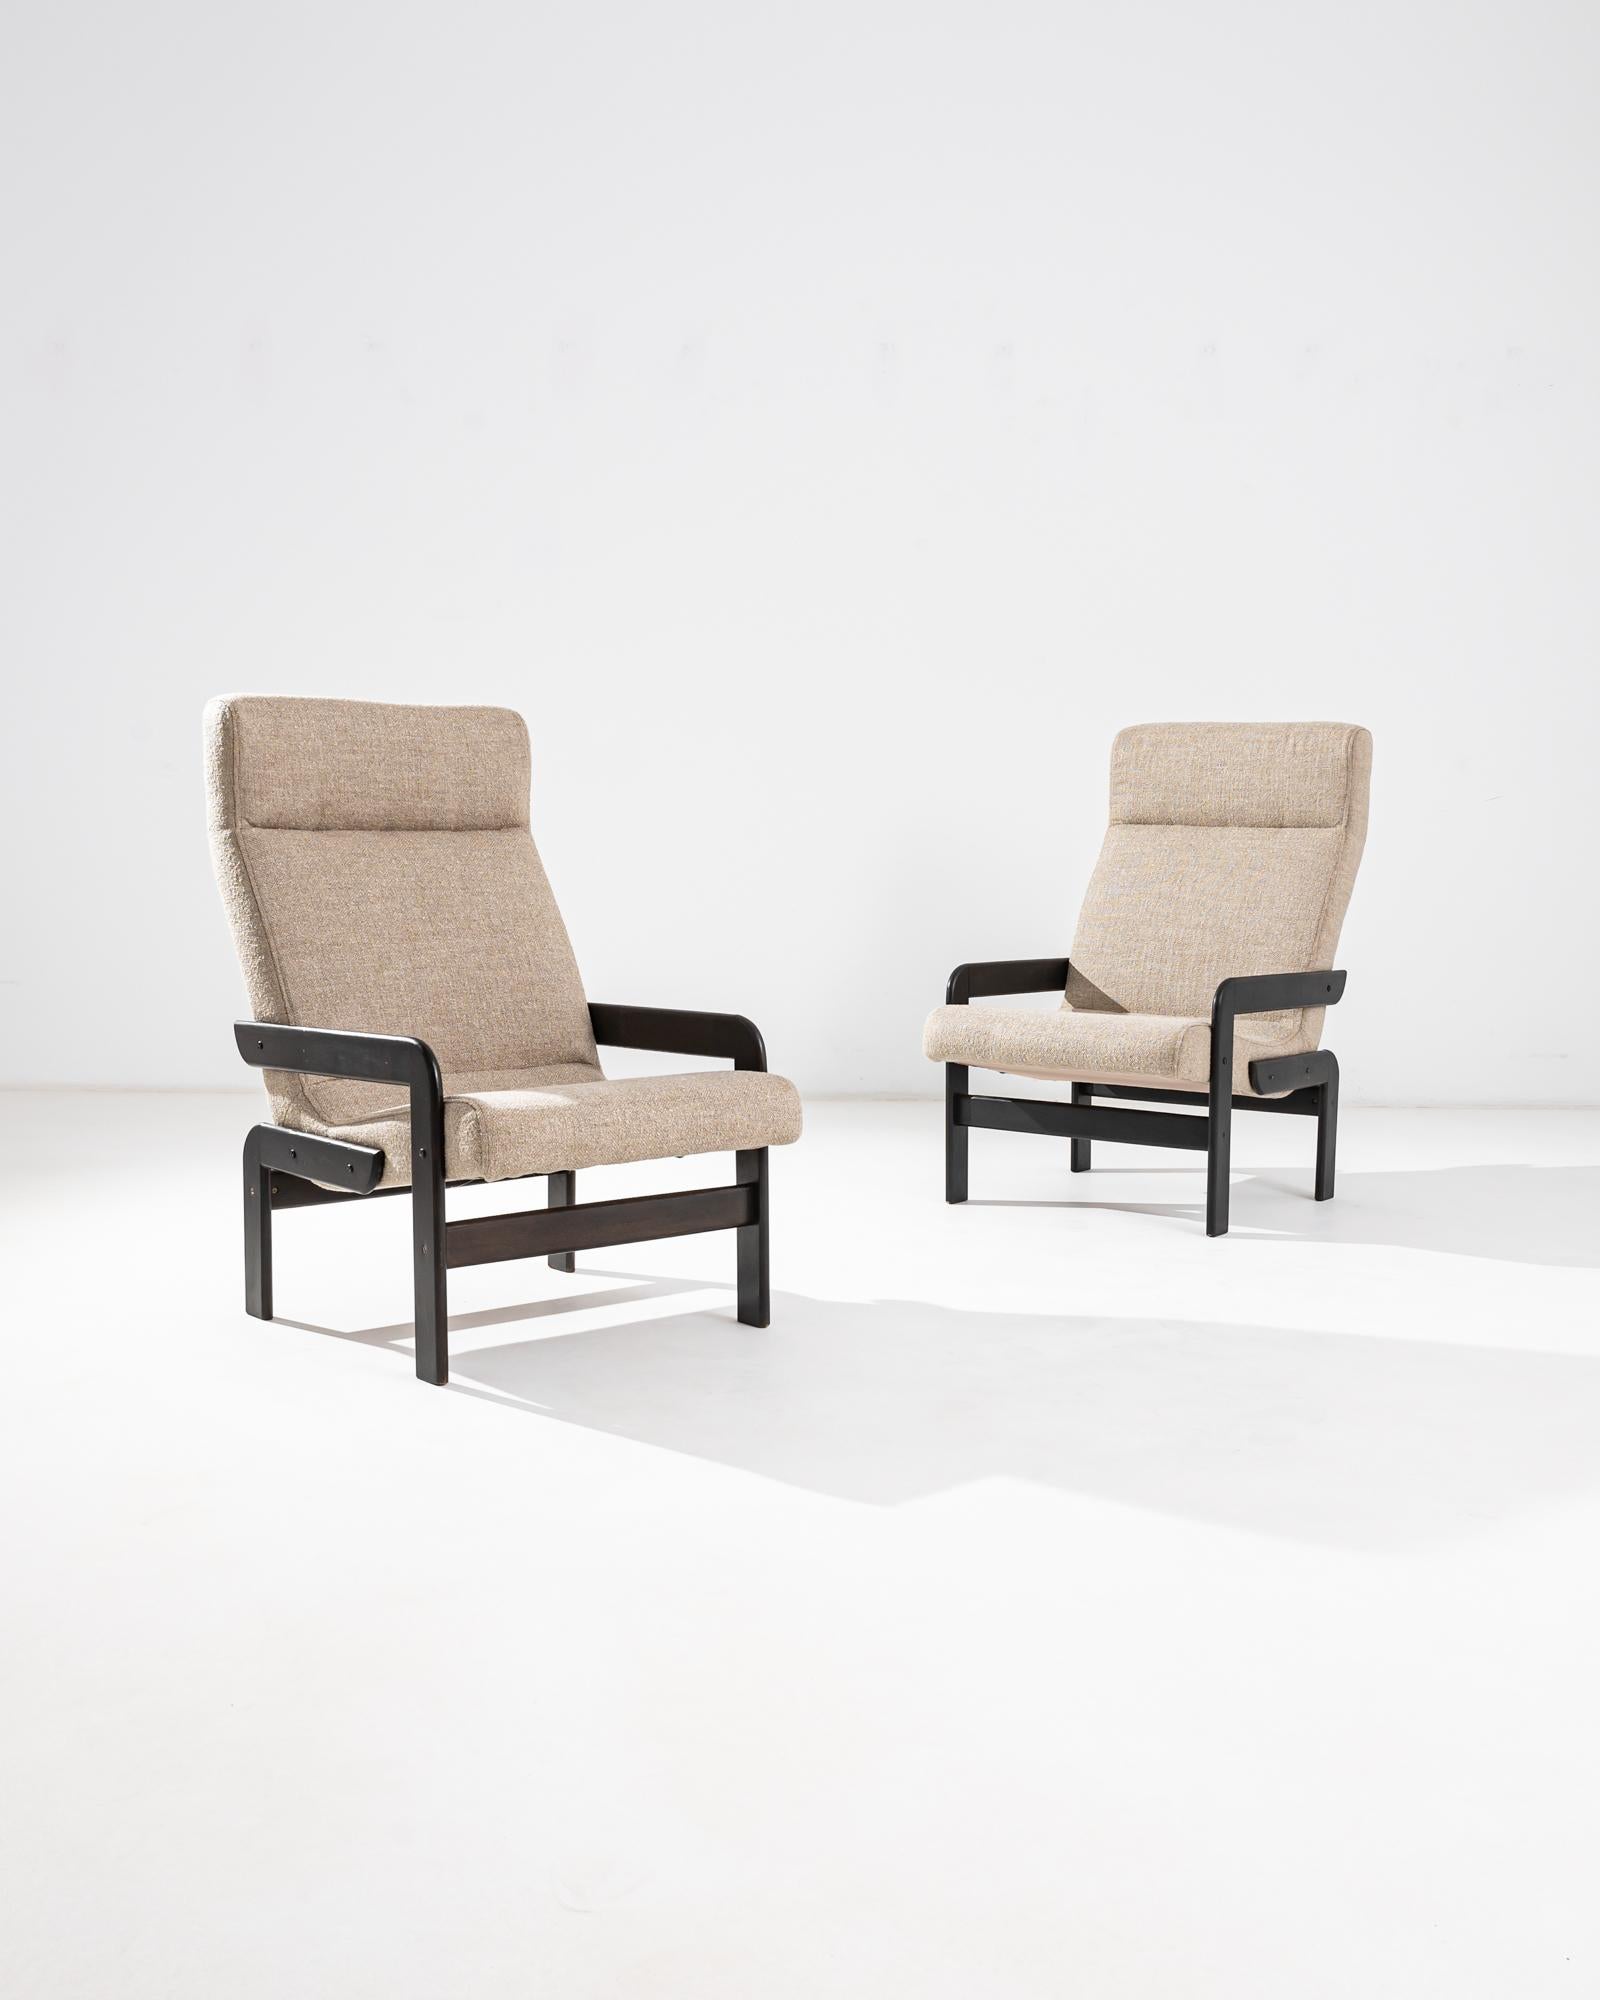 A unique silhouette in stylish black and beige gives this pair of vintage armchairs a Modernist appeal. Made in Czechia in the 20th century, the intriguing geometric shapes of the wooden frame engage the eye. The seat is angled at a relaxing